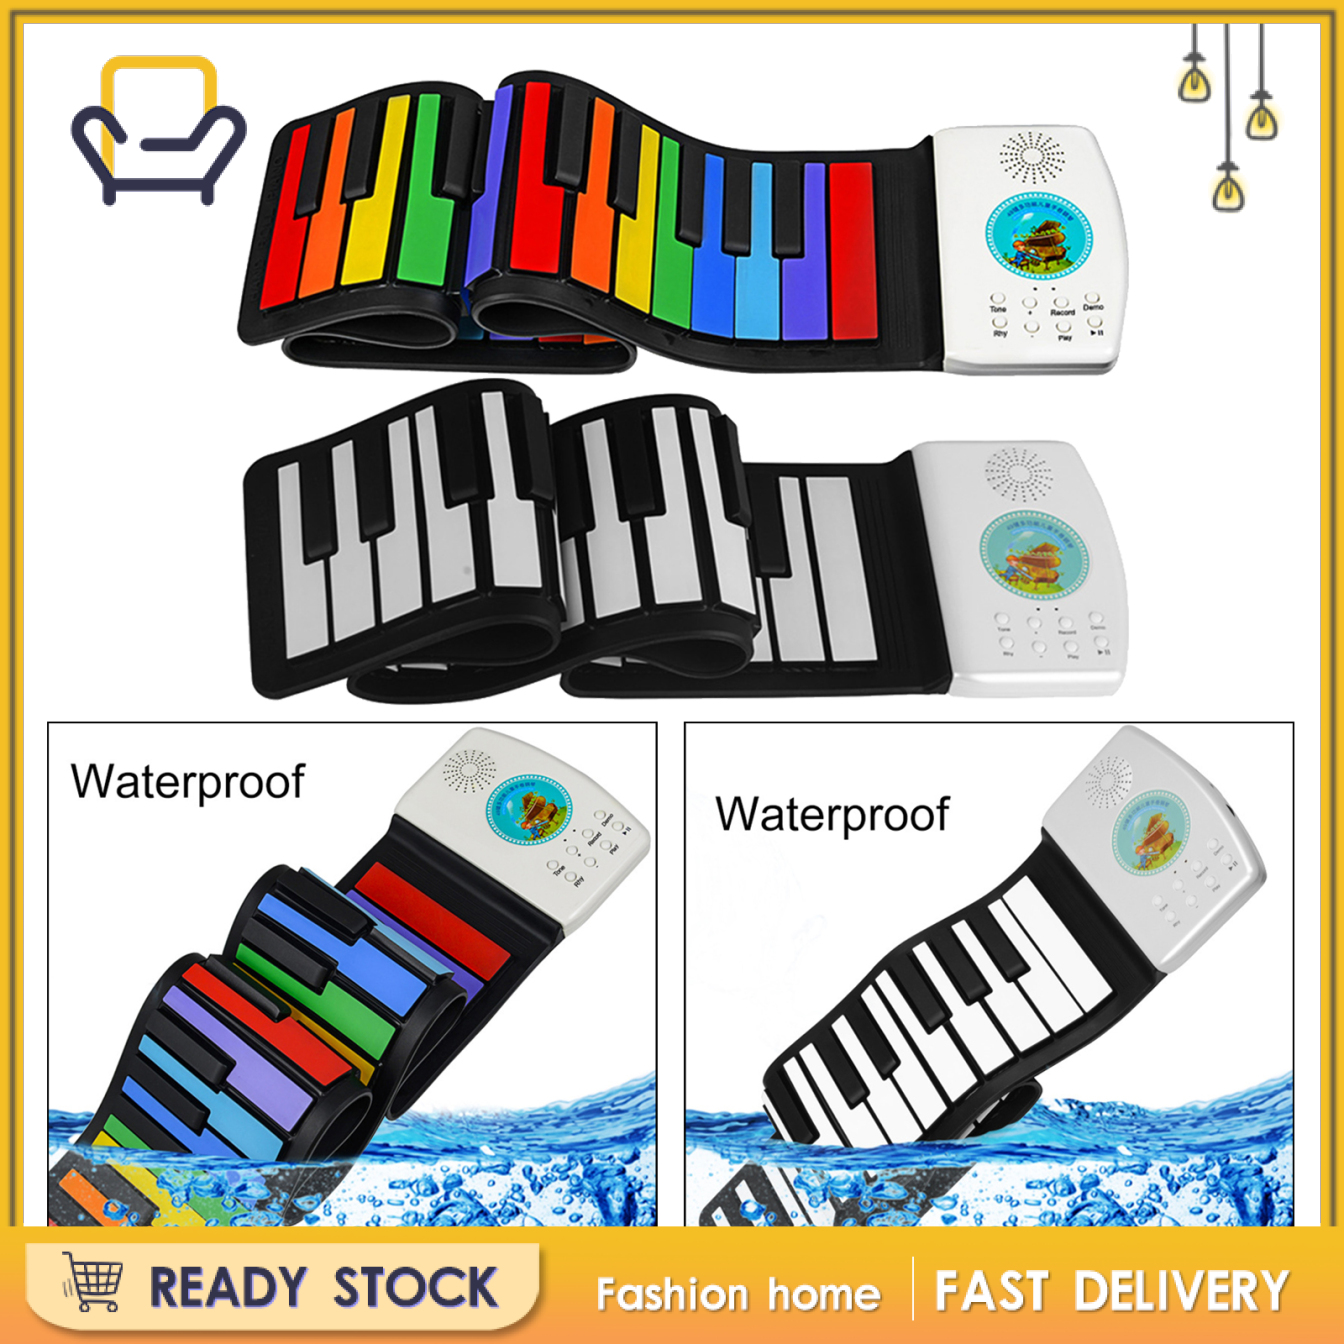 【Fashion home】Roll Up Piano Electric Digital Roll Up Keyboard Piano Gifts